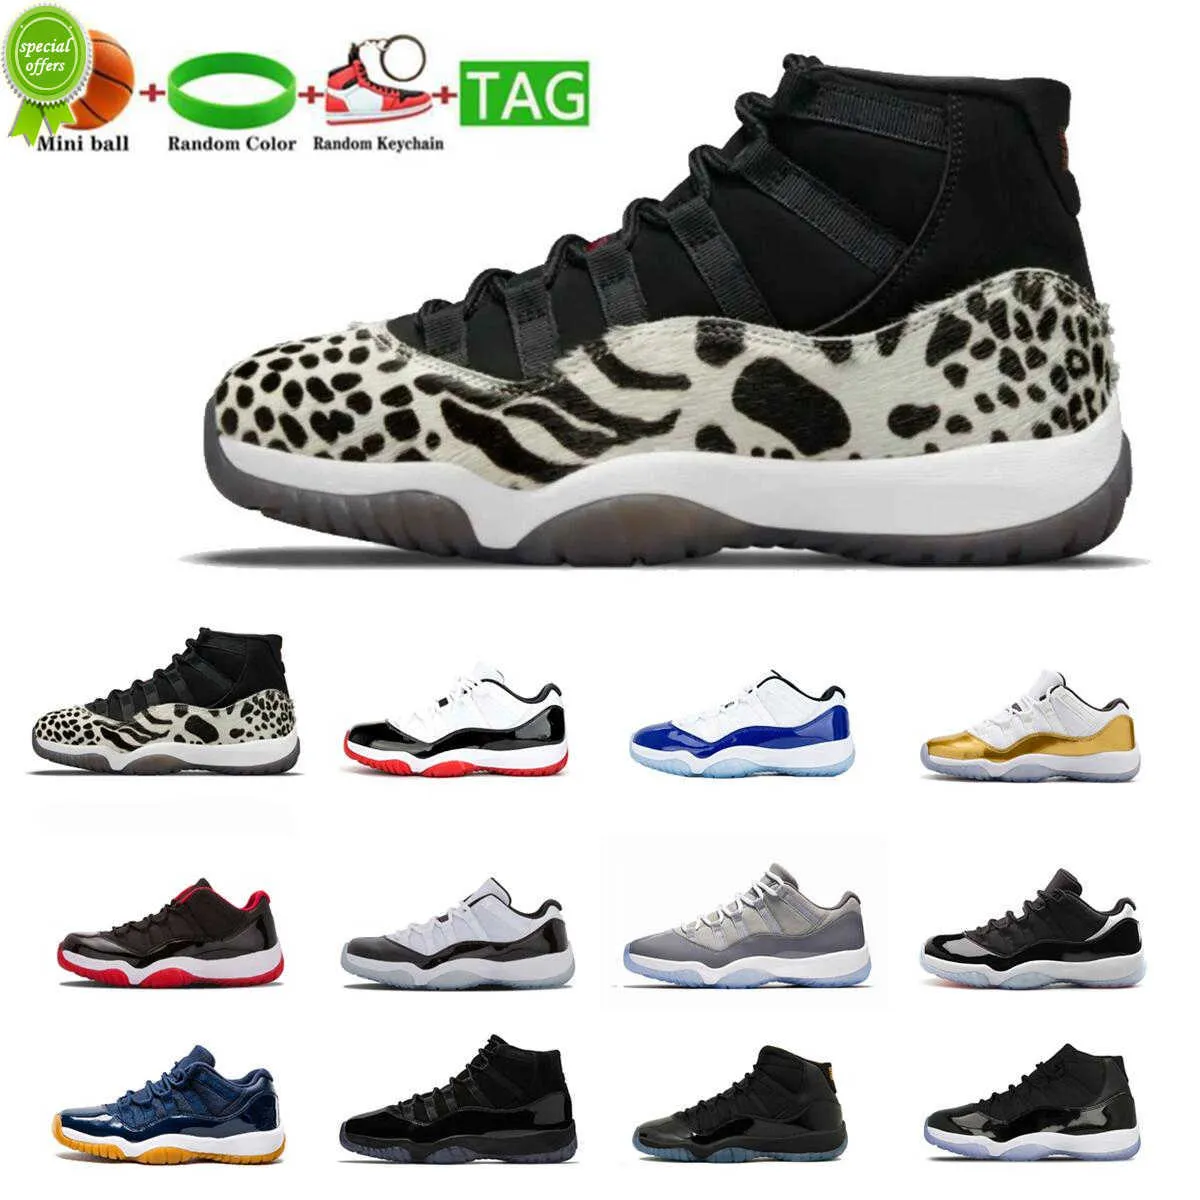 2023 OG Basketball Shoes New Bred Low 11 concord women men 11s Prom Night sneaker Varsity Red sport Space Jam trainer size us 5.5-13